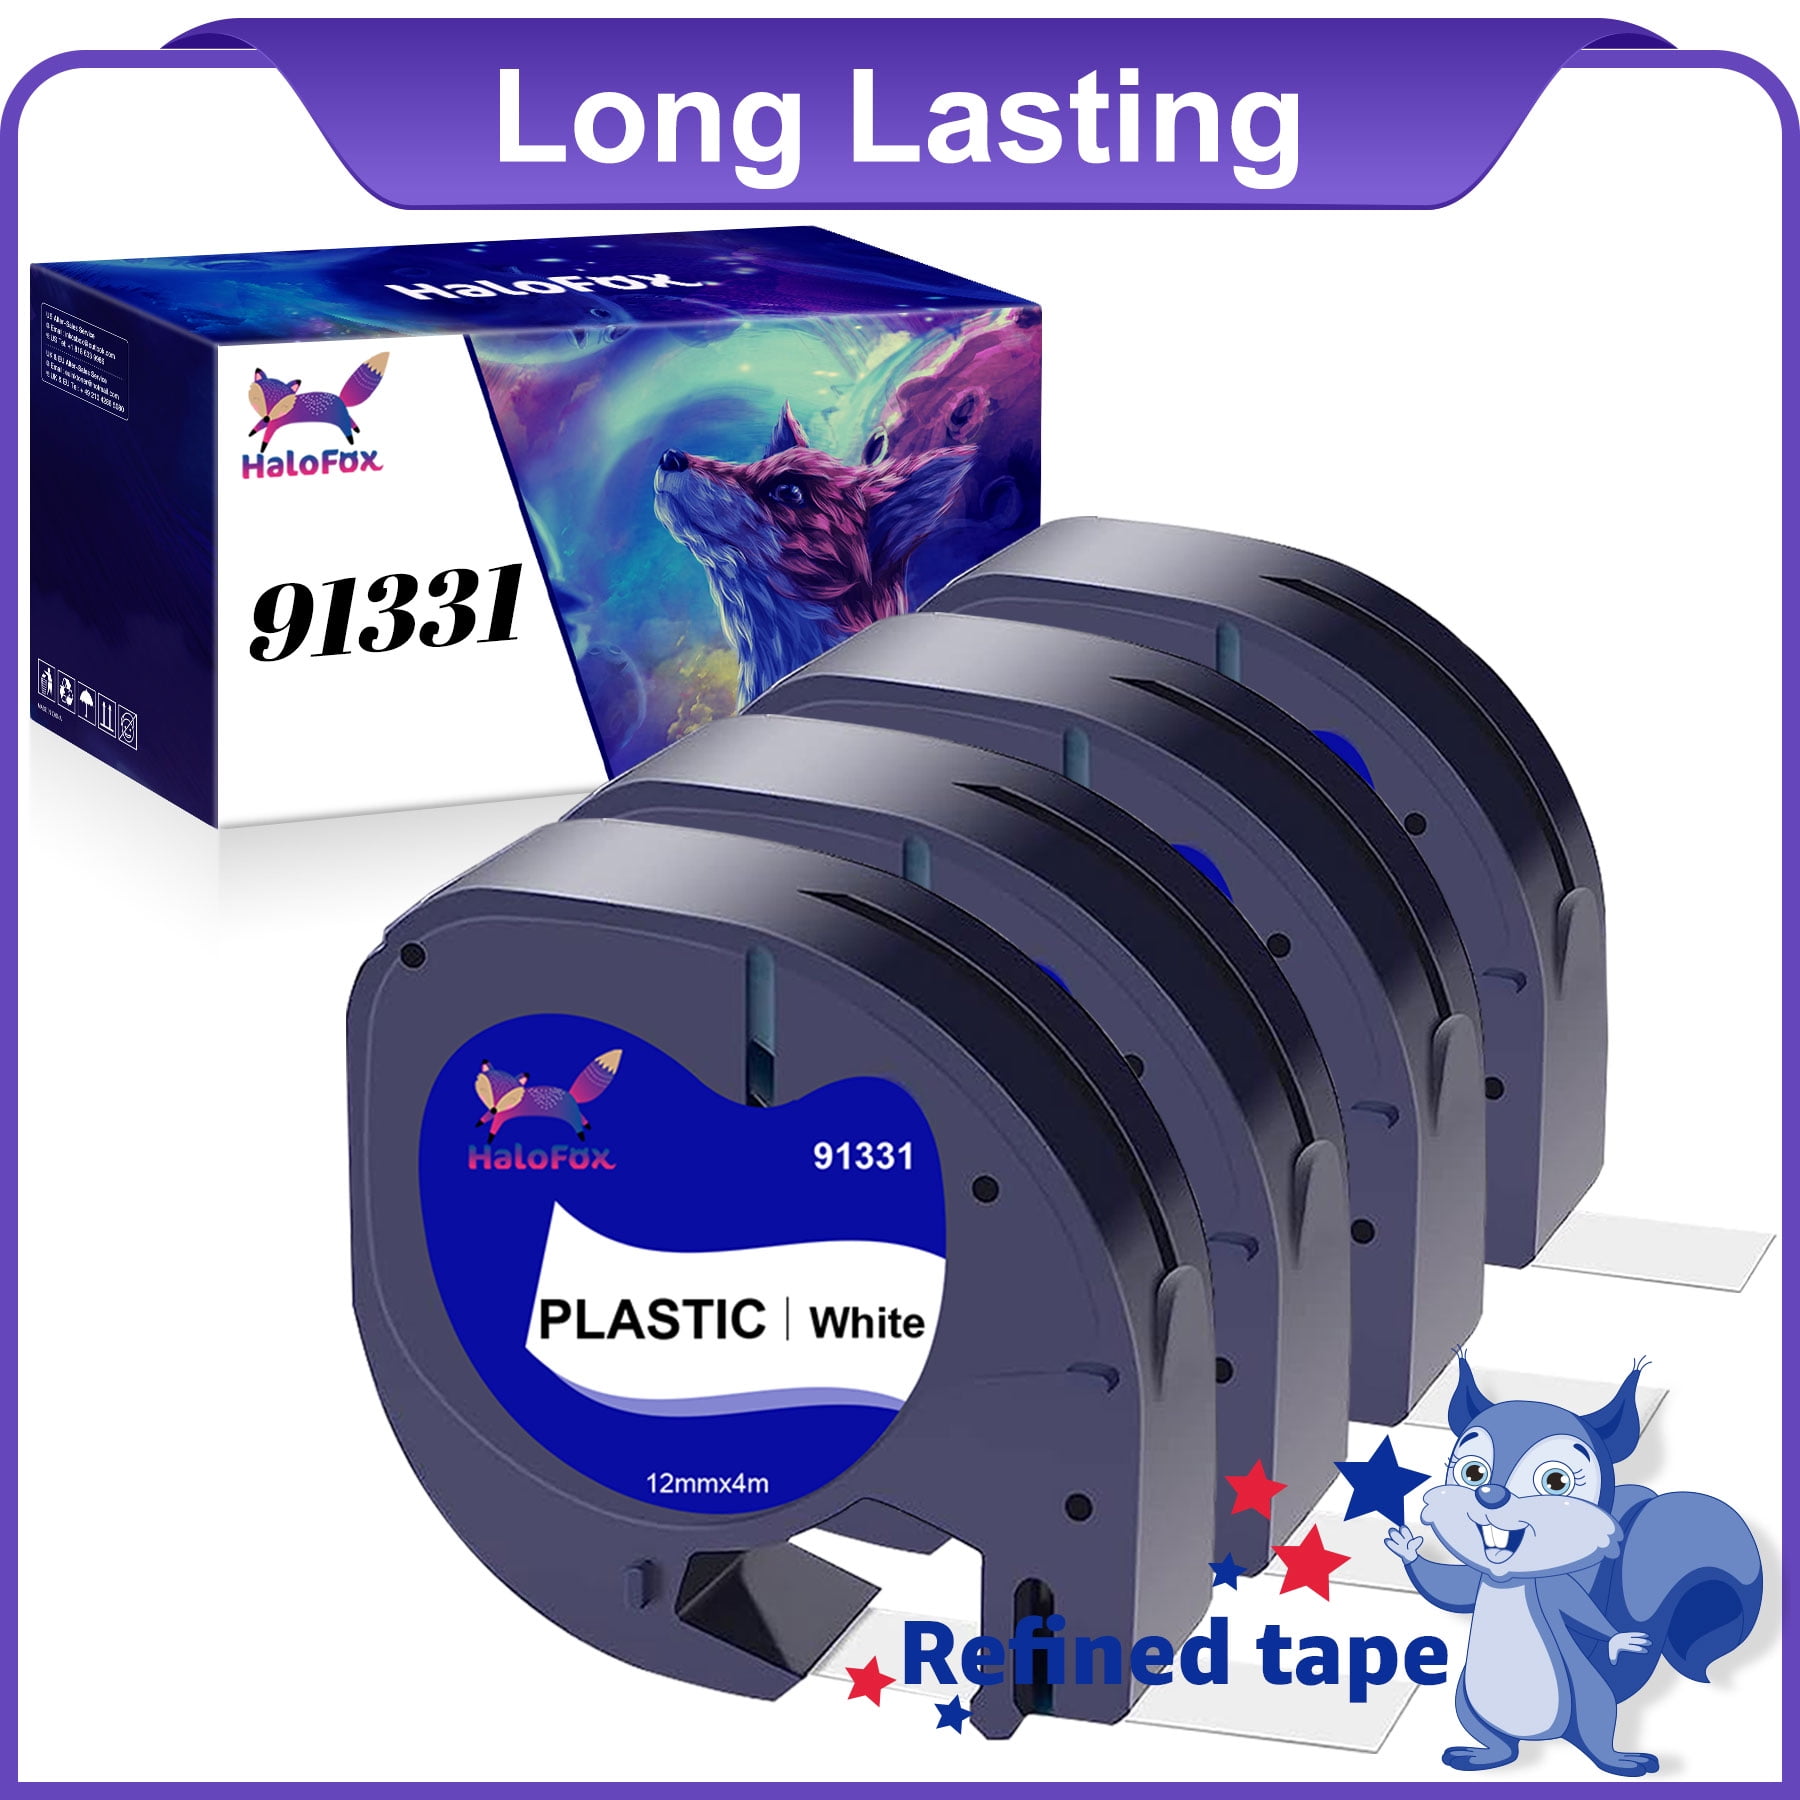 🦊8 Pack letratag label maker refills for Dymo letratag label maker refills  LT Plastic White Tape 91331 (S0721660), for LT-100H LT-100T LT-110T QX50 LT- 200B, Black on White, 12mm x 4m(1/2 x 13') 